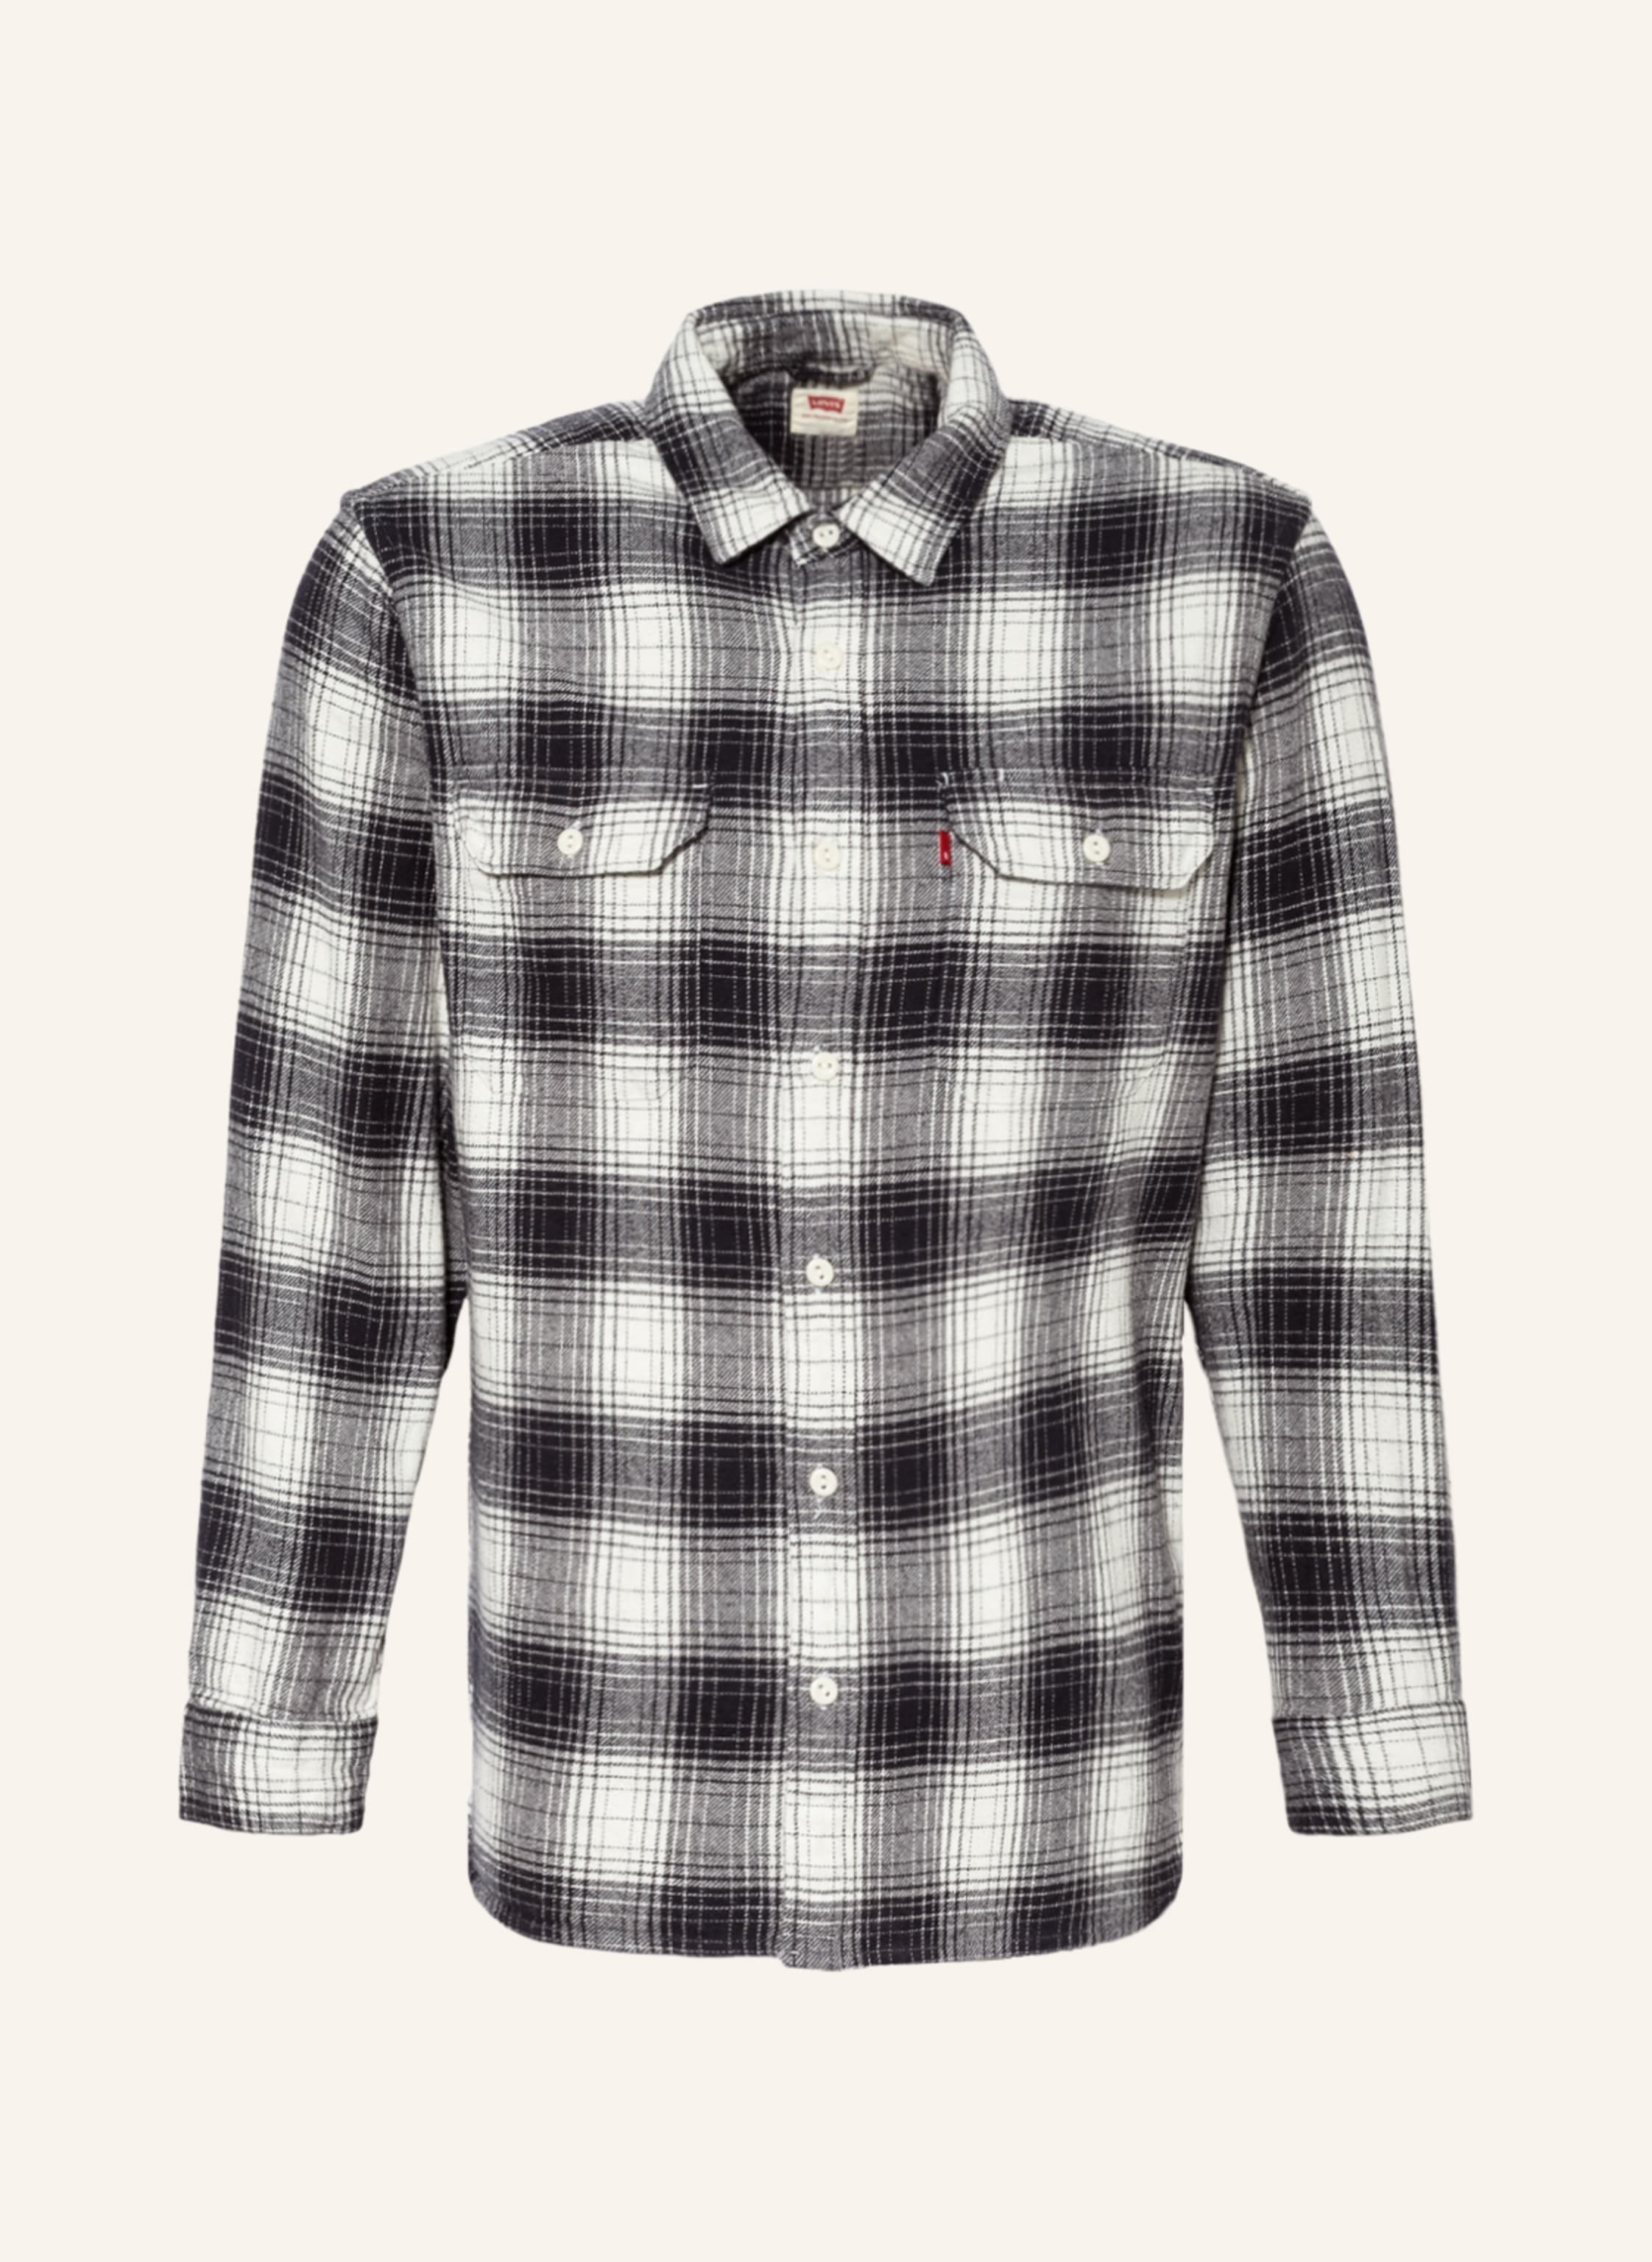 flannel shirts online Hot Sale - OFF 53%